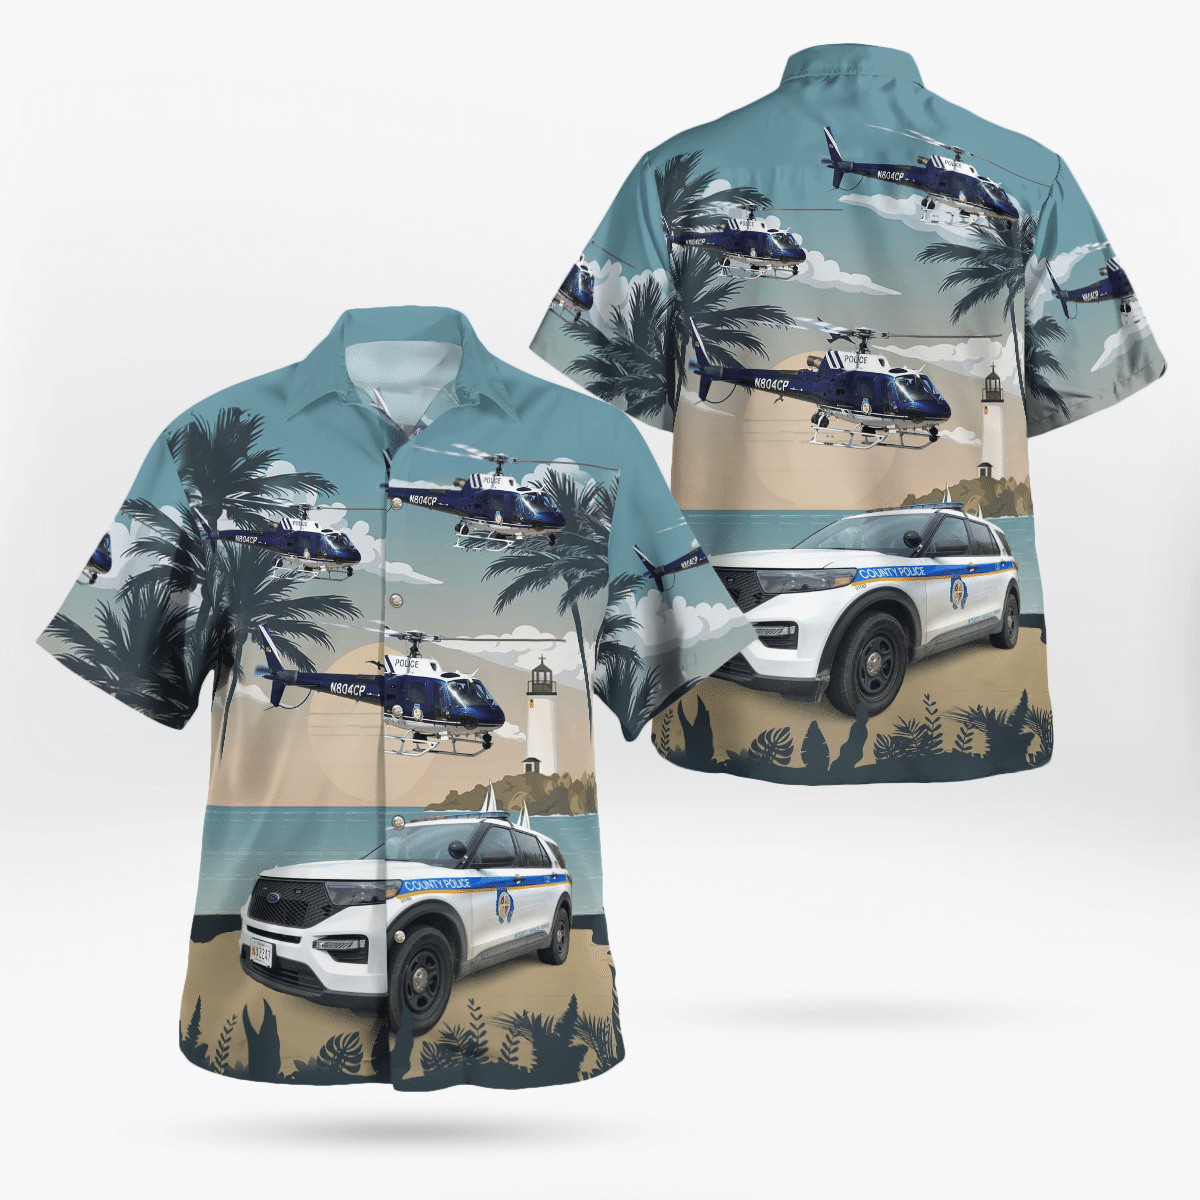 BEST Baltimore County Police Baltimore County Maryland 2020 Ford Explorer And Eurocopter AS-350B-3 Ecureuil Hawaii Shirt1